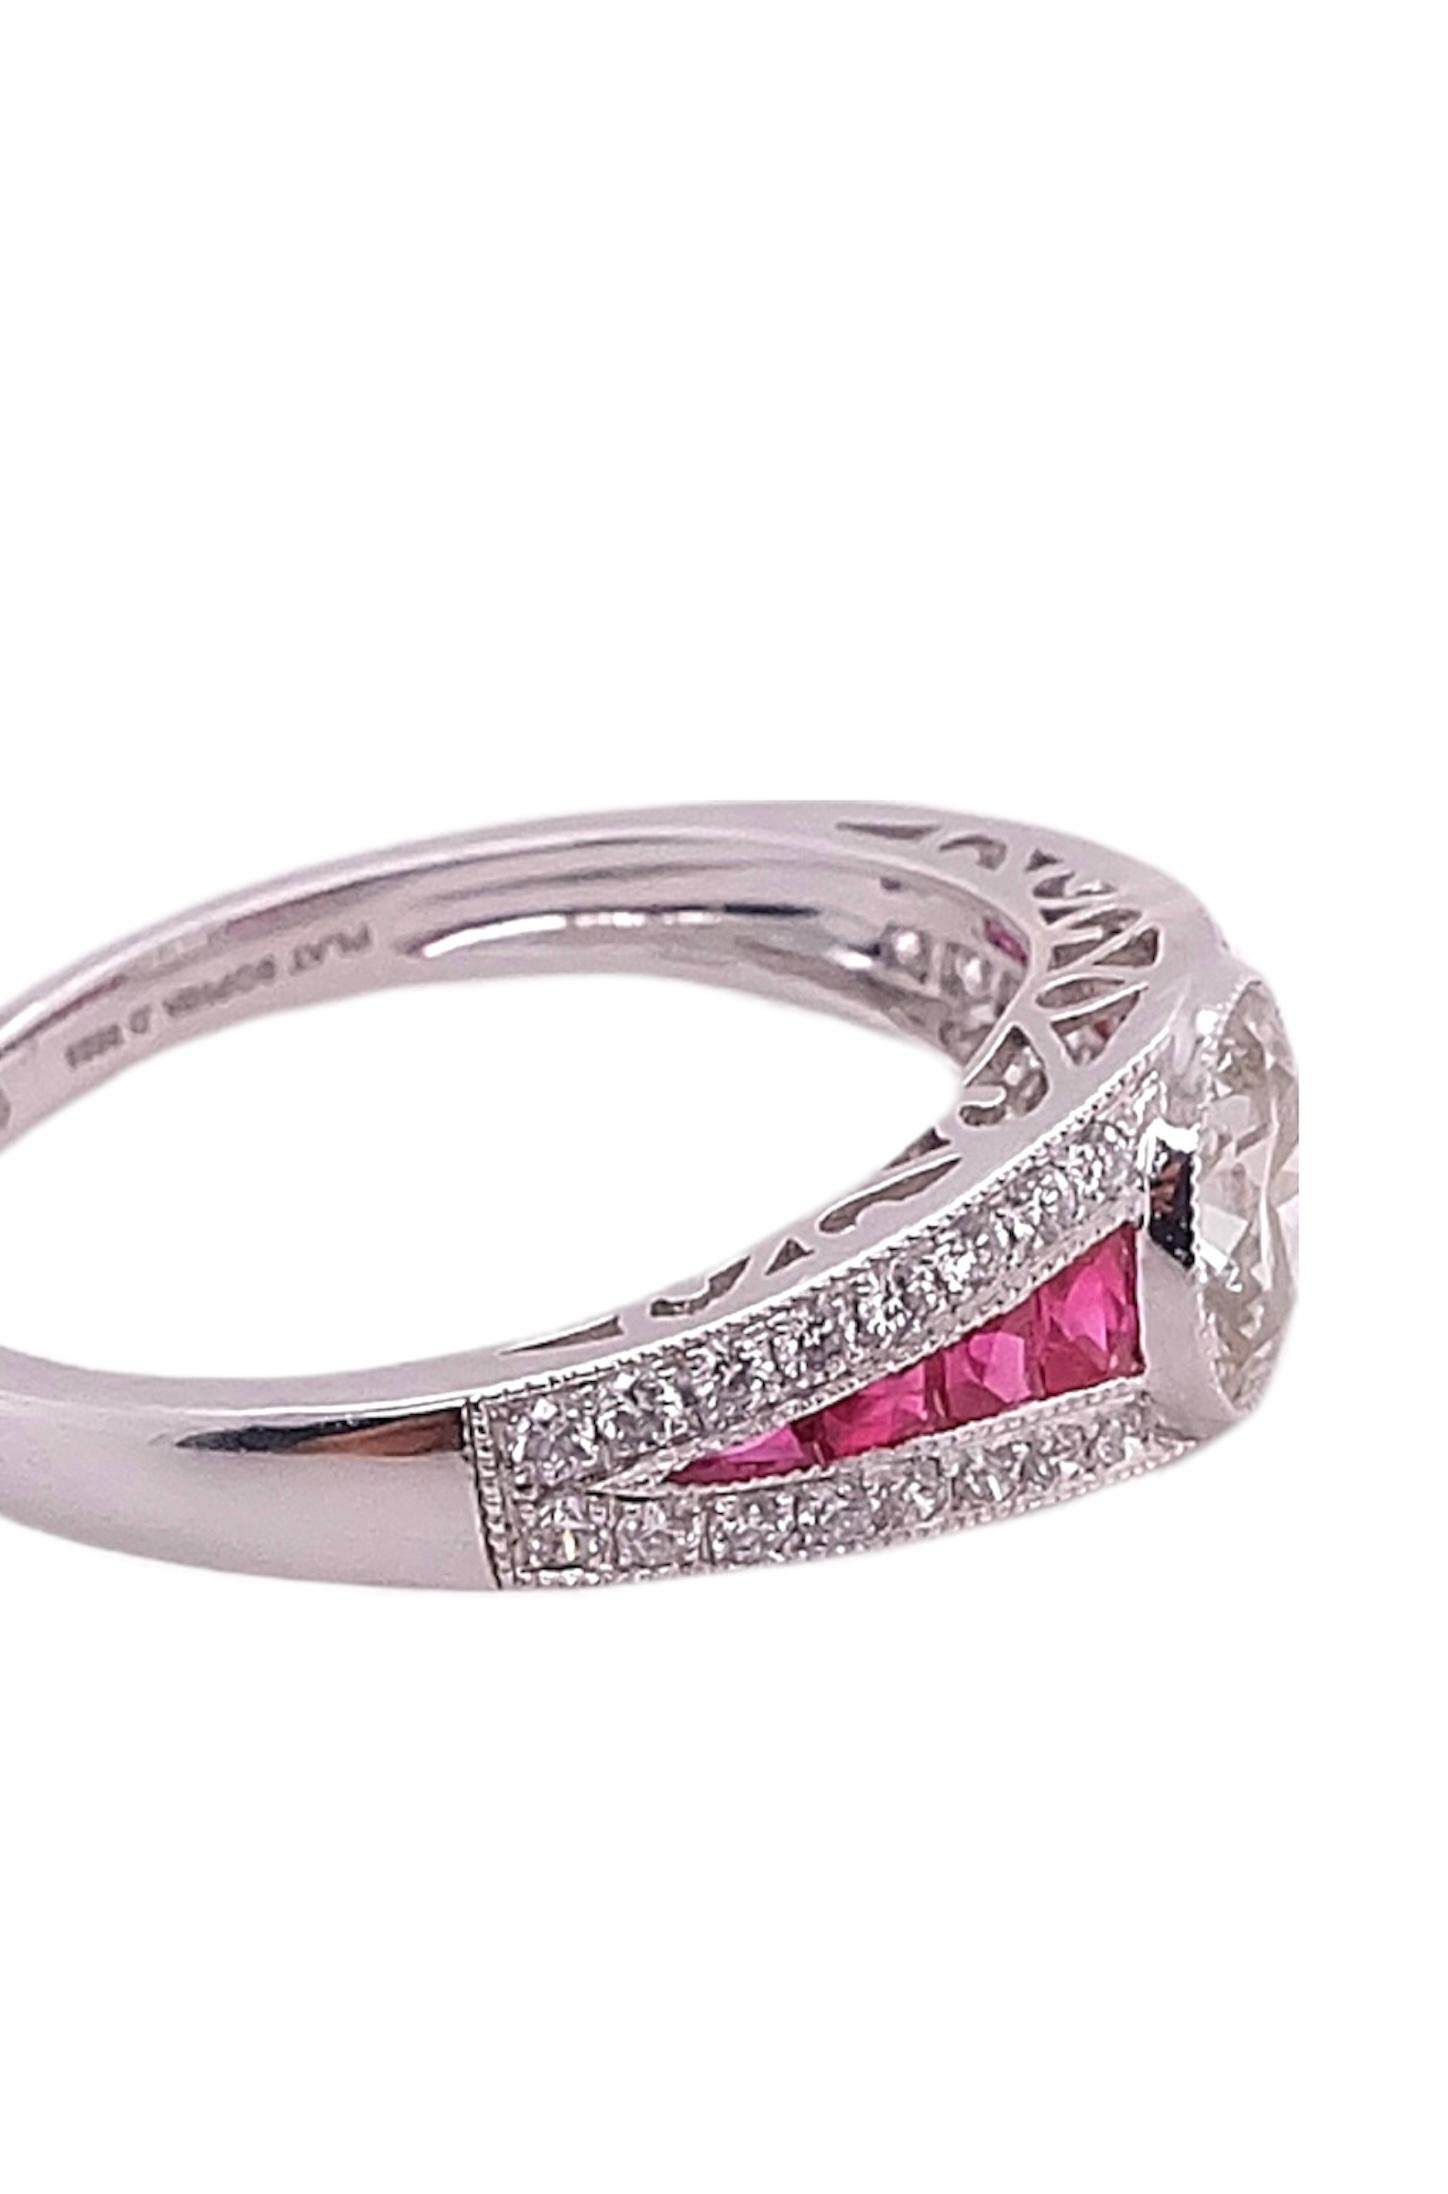 0.92 Carat Diamond Ring accentuated with 0.25 rubies and 0.20 small round diamonds.

Sophia D by Joseph Dardashti LTD has been known worldwide for 35 years and are inspired by classic Art Deco design that merges with modern manufacturing techniques. 